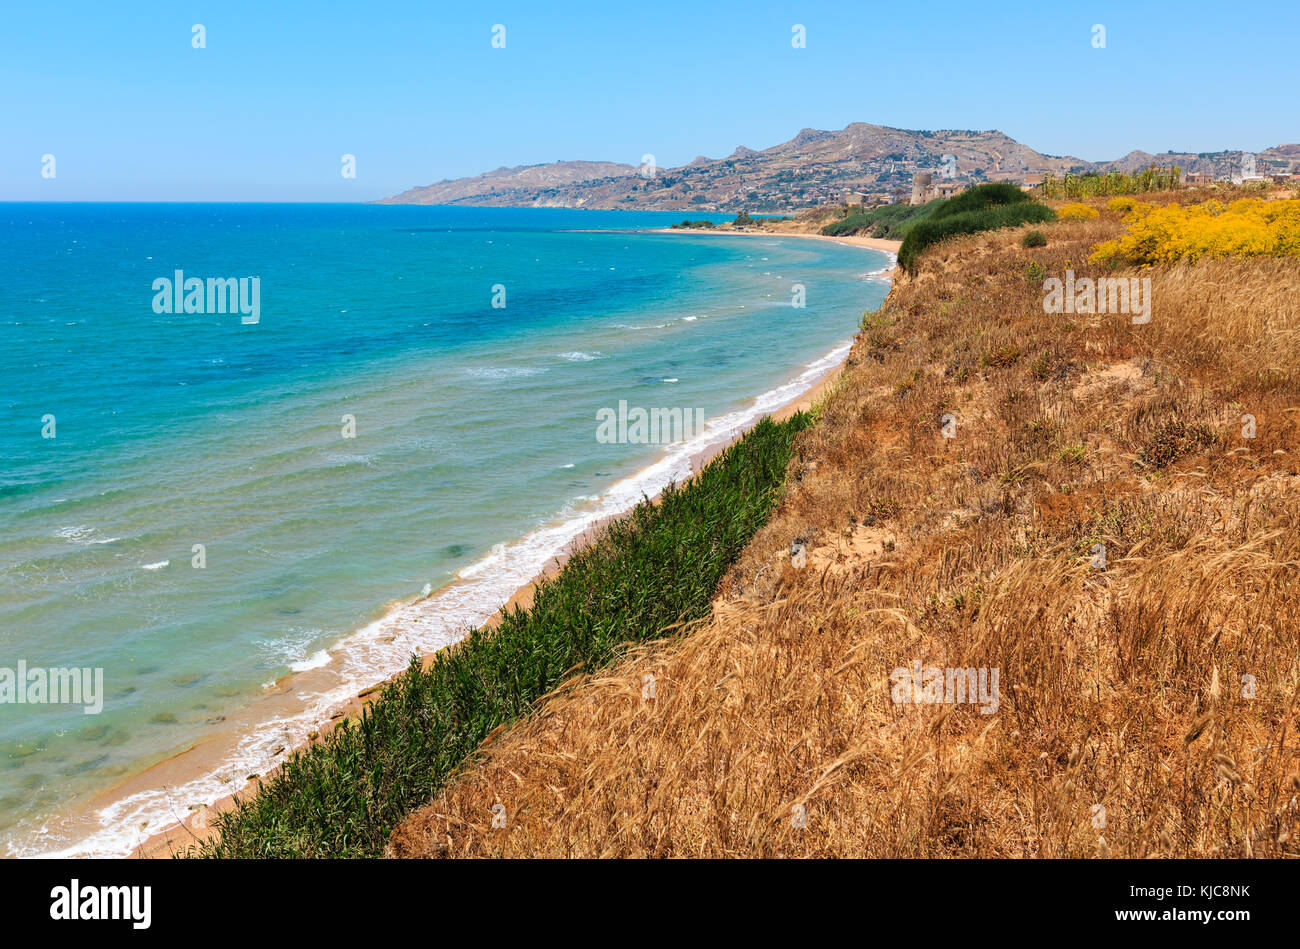 Paradise sea bay with azure water and beach. View from coastline, Torre di Gaffe, Agrigento, Sicily, Italy Stock Photo